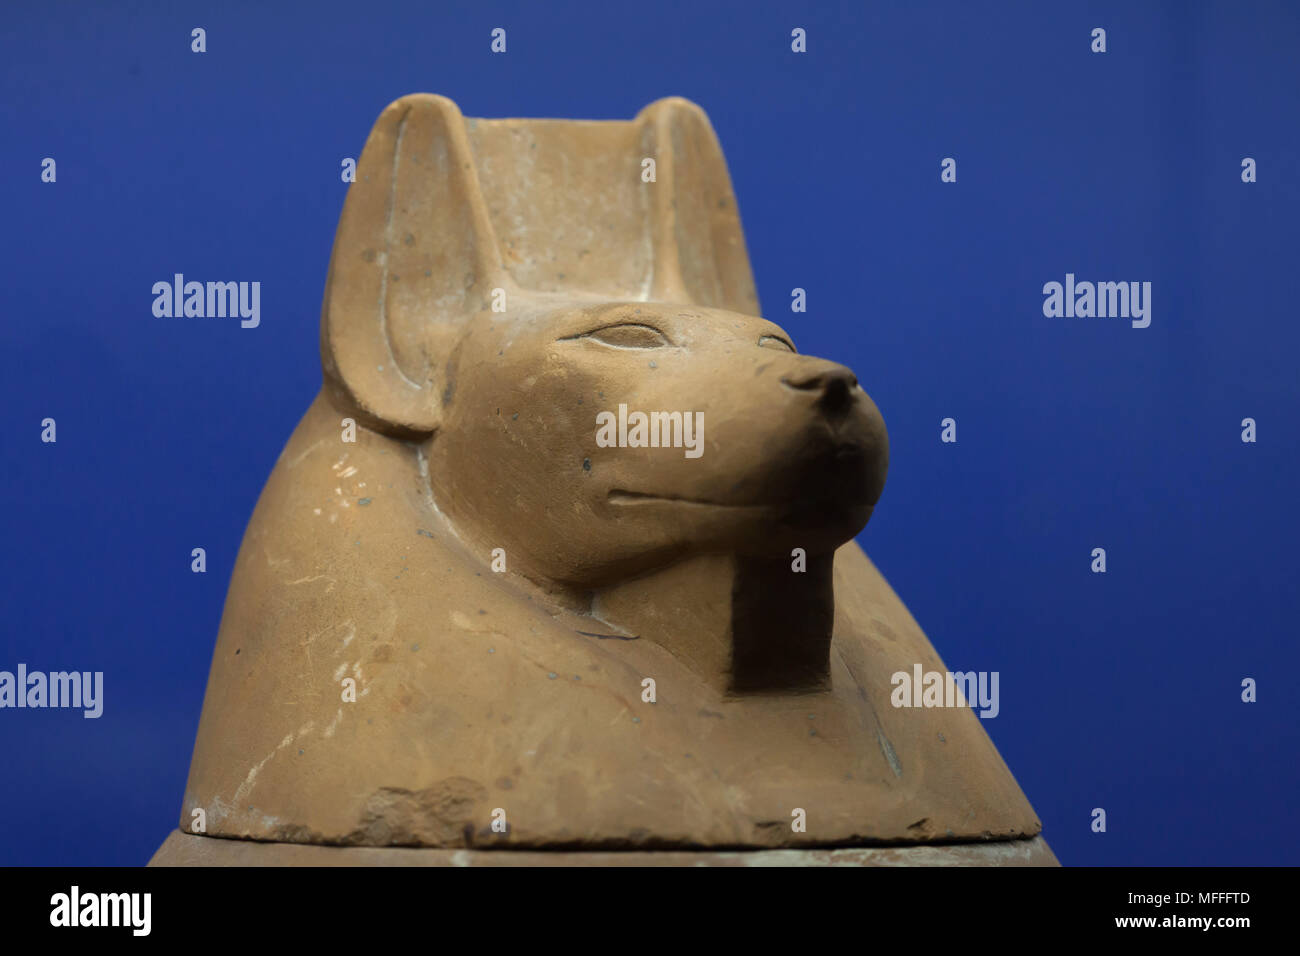 Duamutef. Jackal-headed god. Ancient Egyptian limestone cover of the canopic jar of Payefciauemauiaset dated from the 26th Dynasty (664-525 BC) on display in the National Archaeological Museum (Museo Archeologico Nazionale di Napoli) in Naples, Campania, Italy. Stock Photo